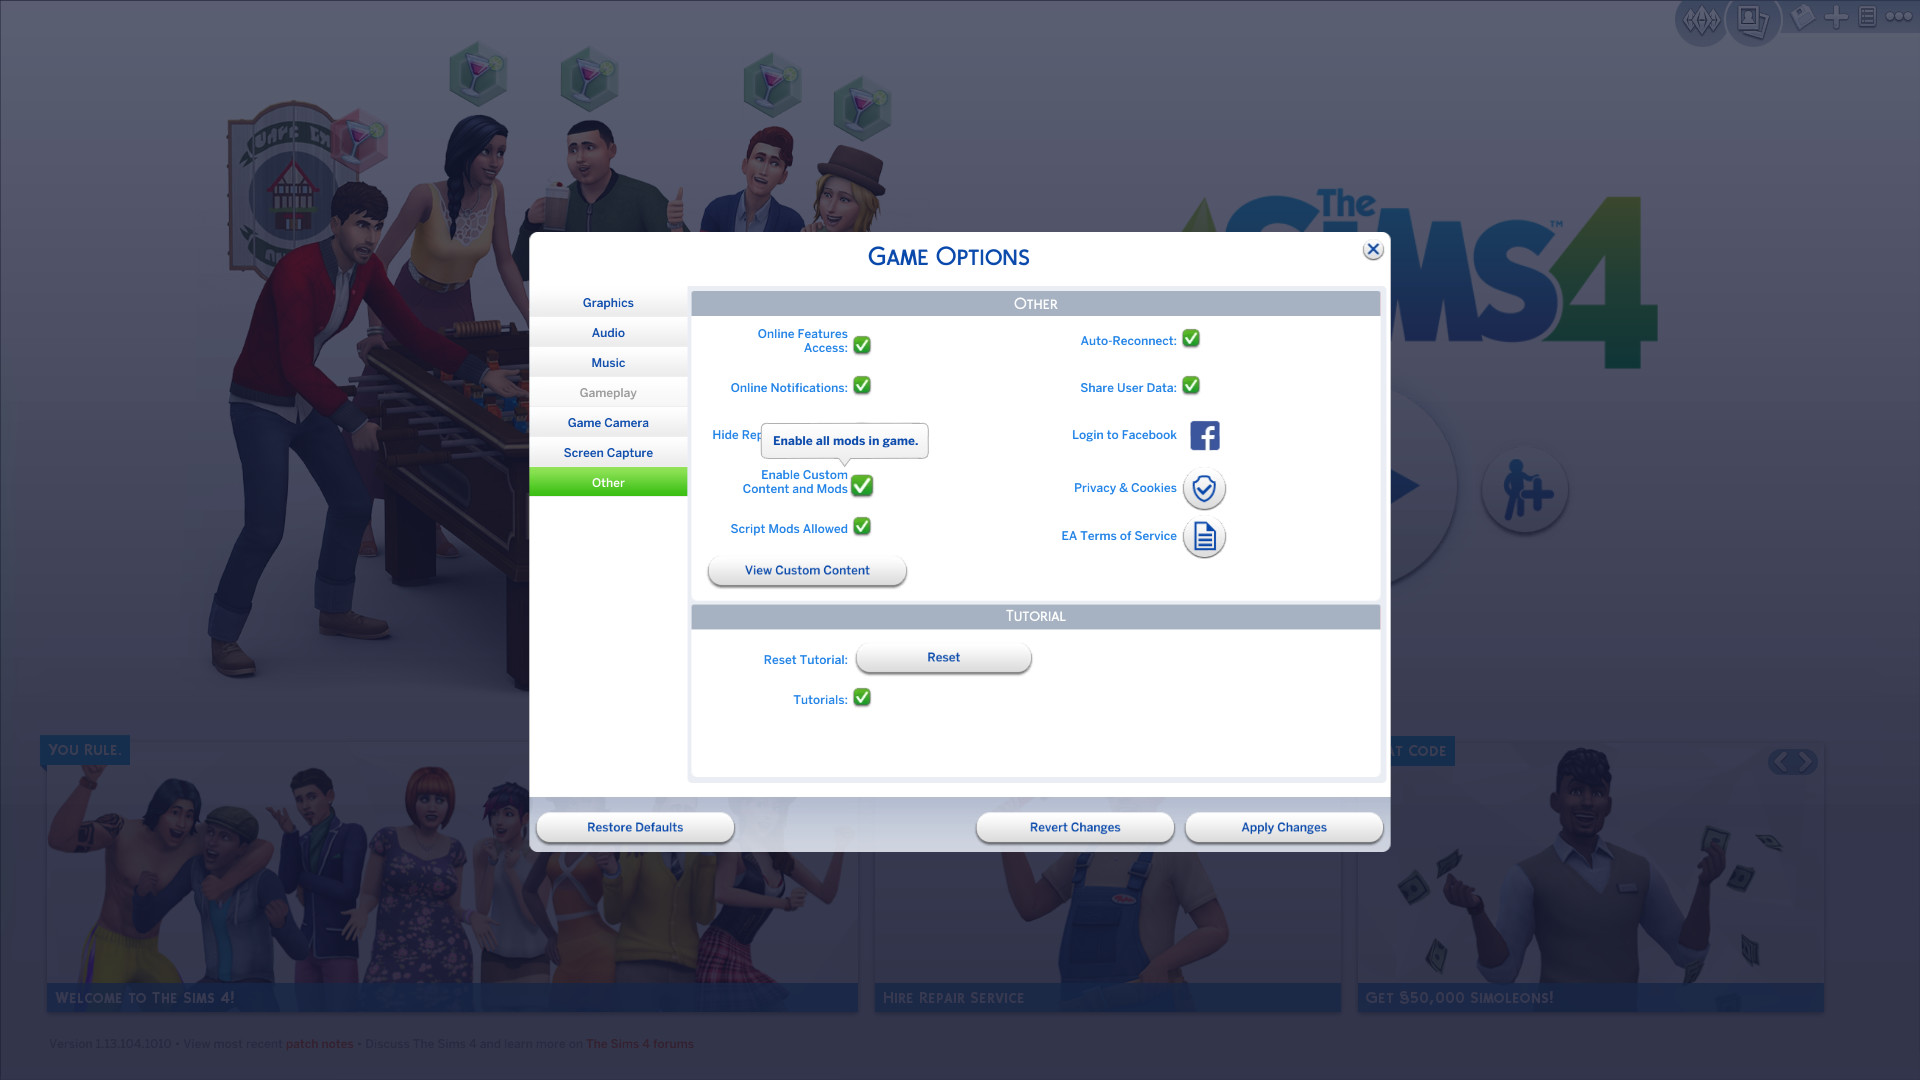 1920x1080 Picture source: http://simsvip.com/2015/12/04/the-sims-4 -mods-now-automatically-disabled-with-new-game-patches/